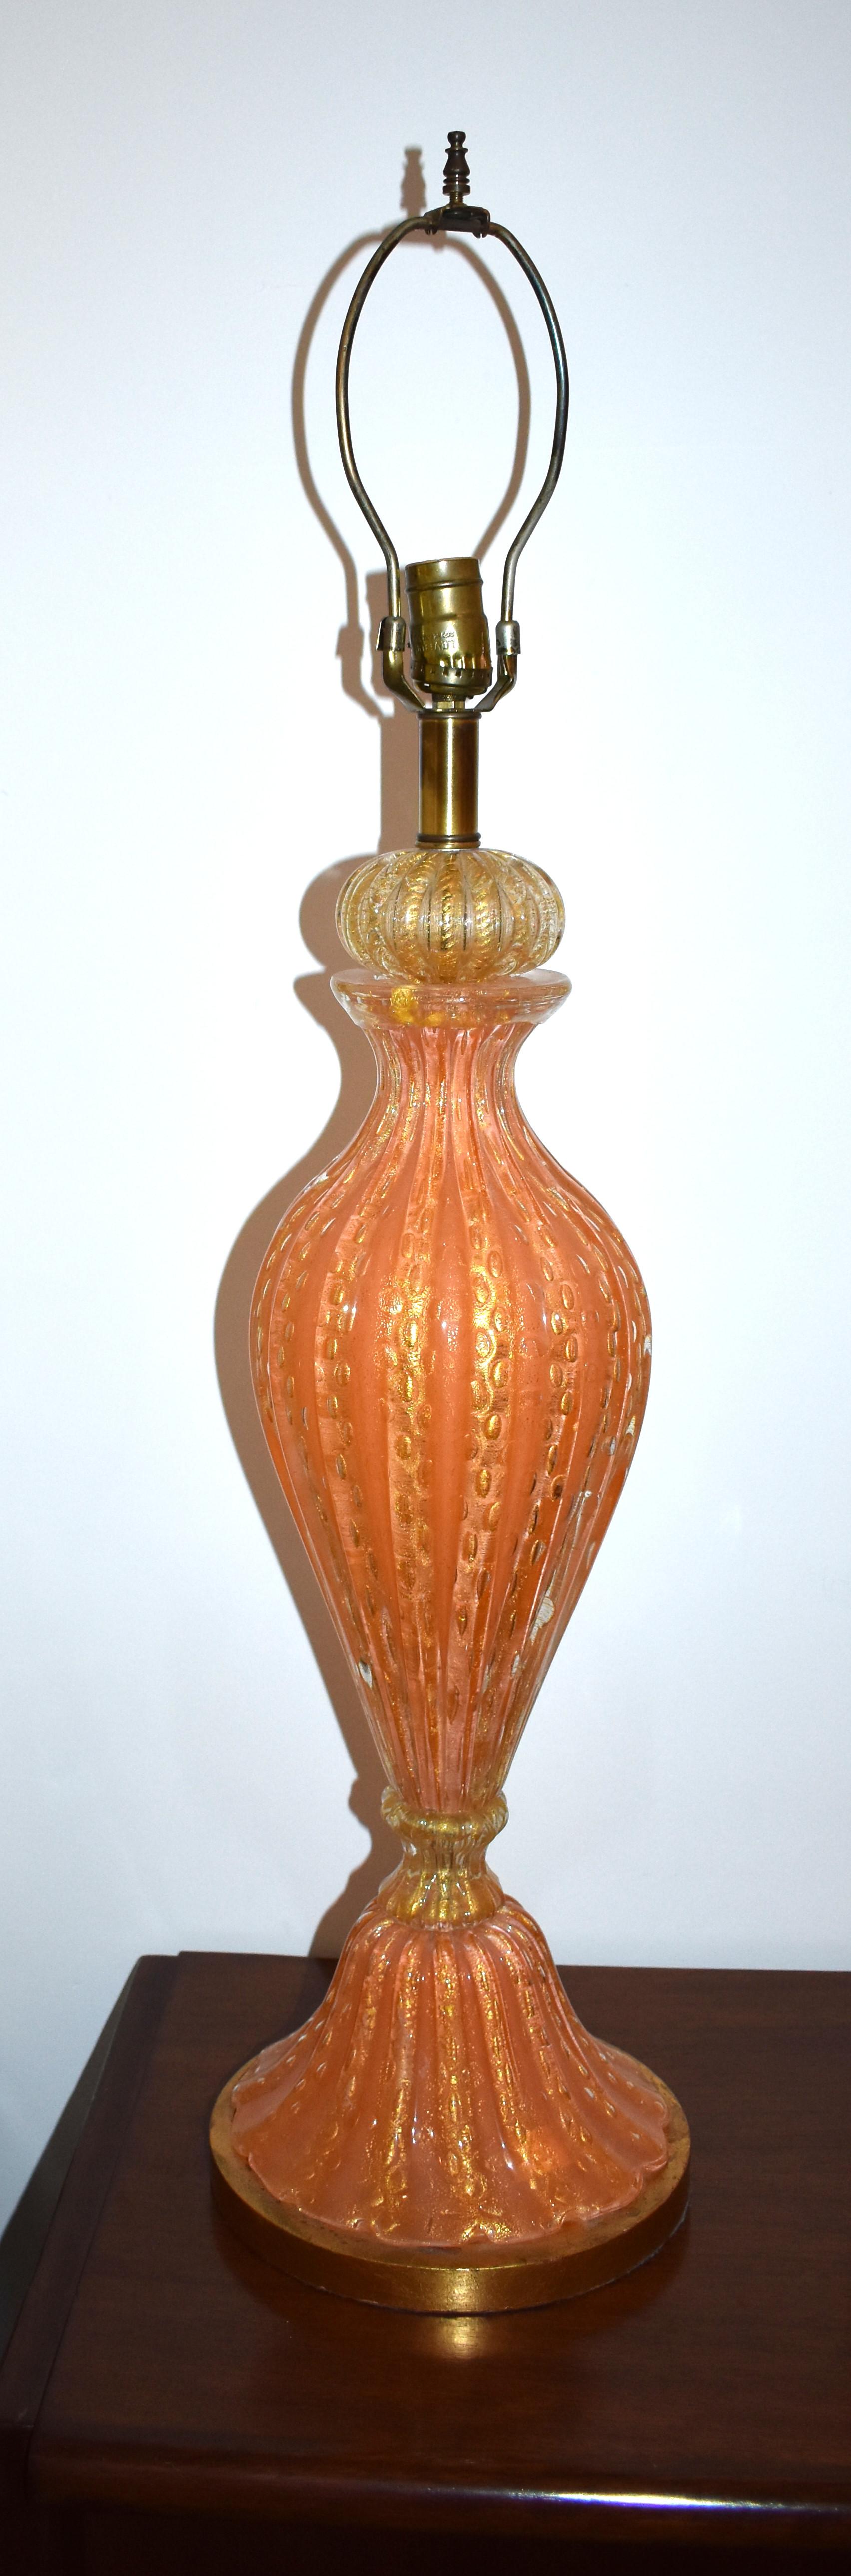 A single Murano hand blown orange and gold inclusions glass table lamp. The ribbed glass is thick and heavy with controlled bubbles and is mounted on gold finish wooden base.

Height of glass part only 24 inches.